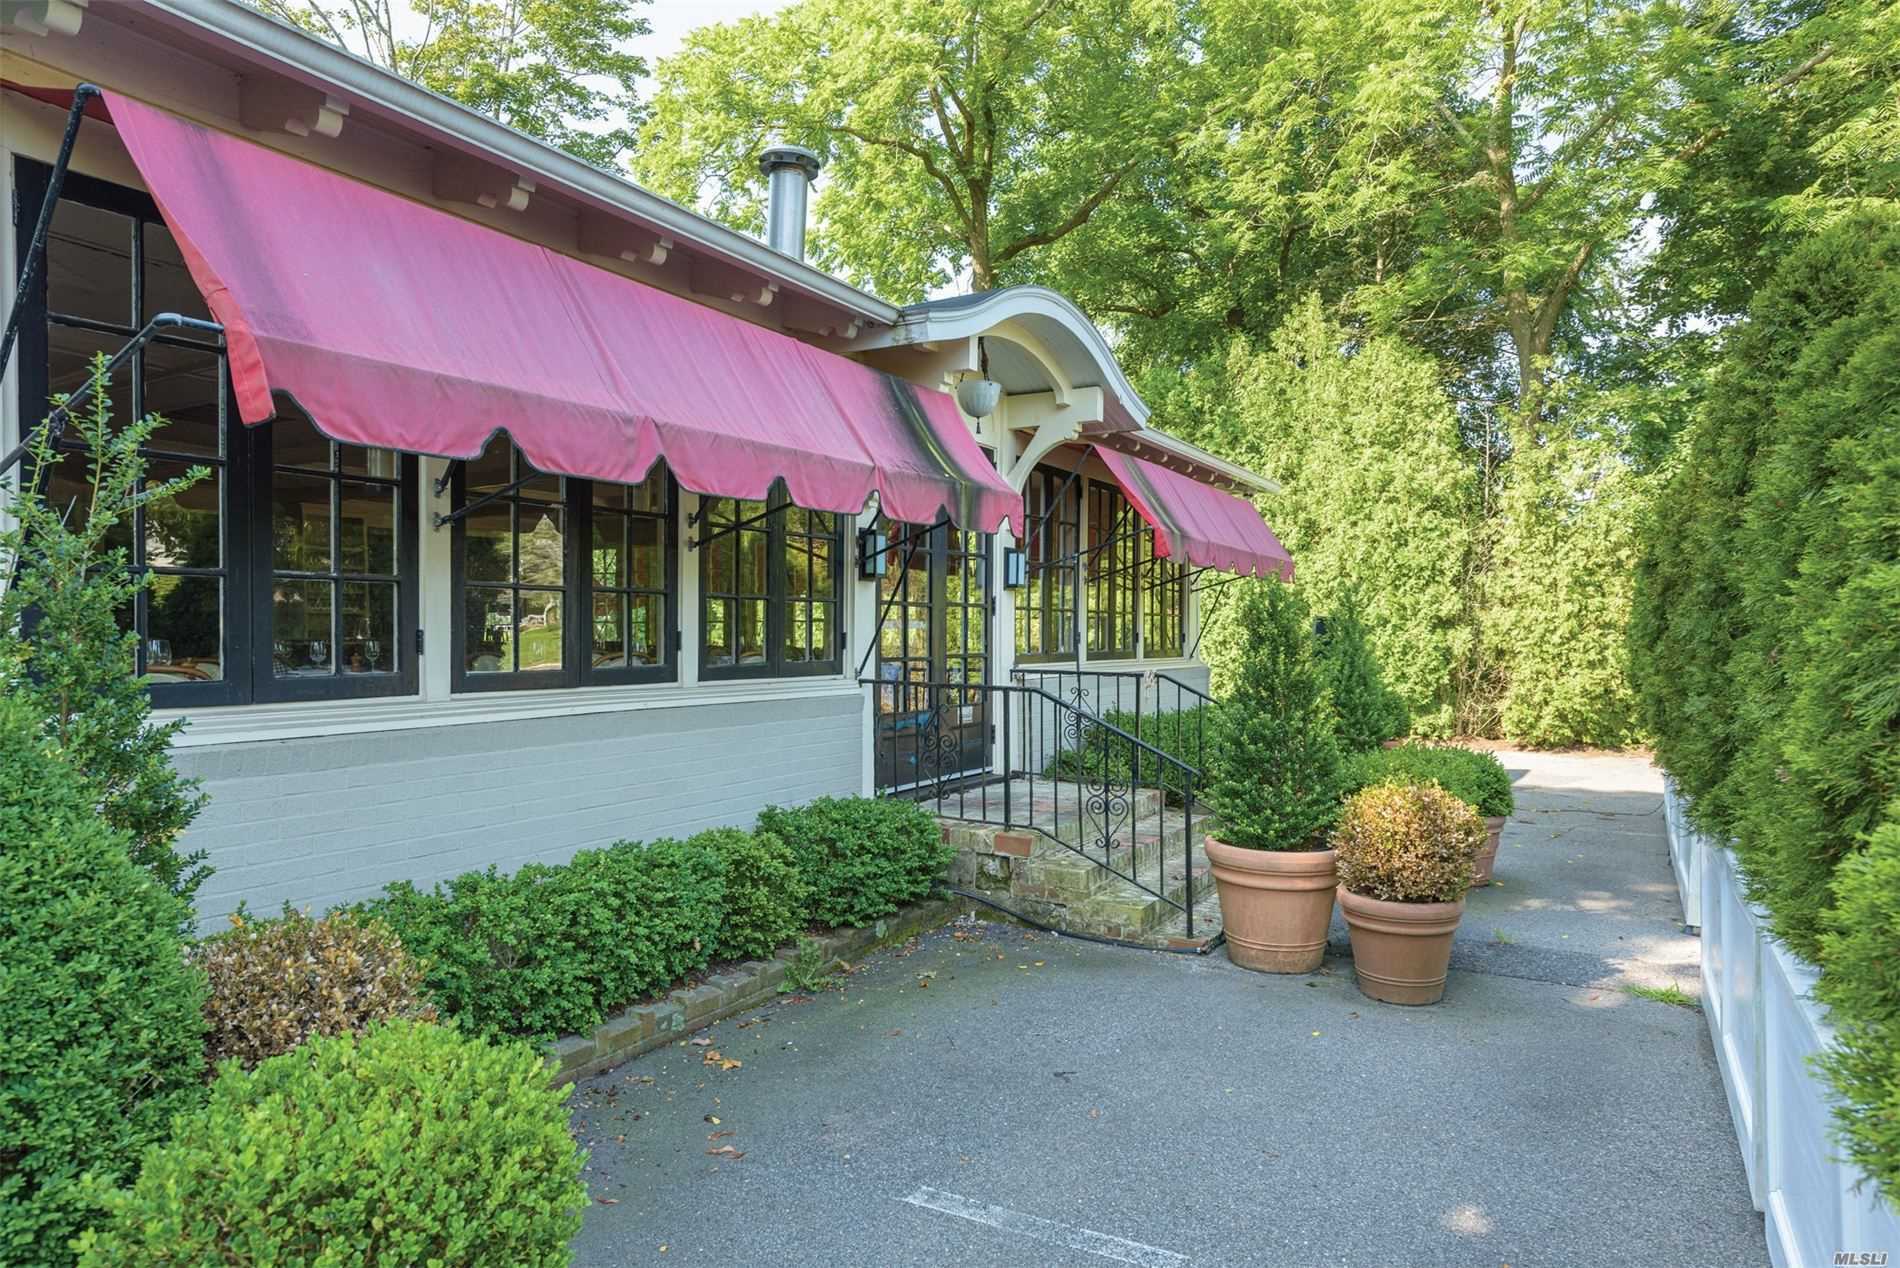 The site of shuttered restaurant Red Bar, 210 Hampton Road in Southampton Village, is for sale. COURTESY DOUGLAS ELLIMAN